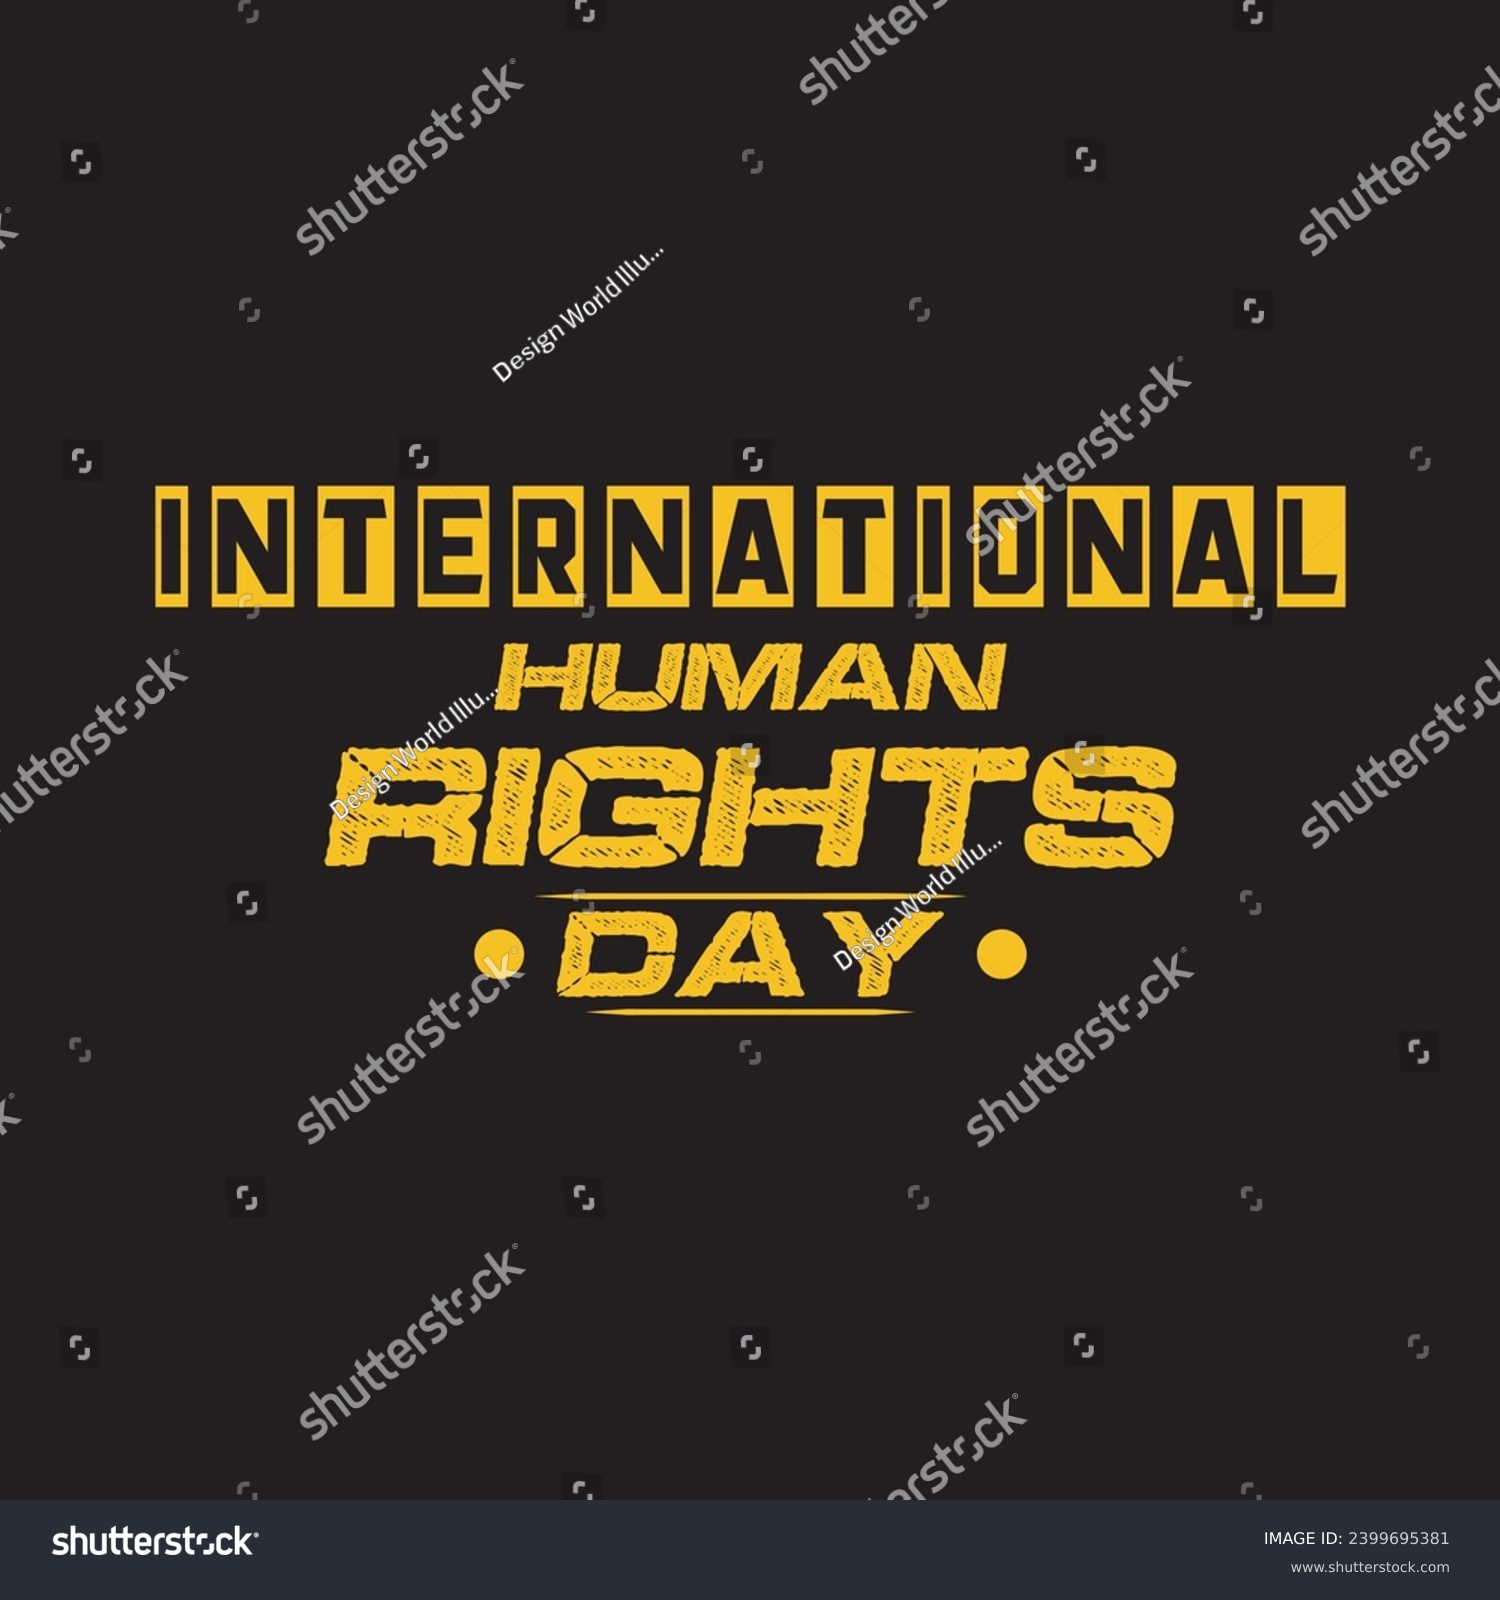 SVG of International human rights day event t shirt design for apparel. Bill of rights day. svg